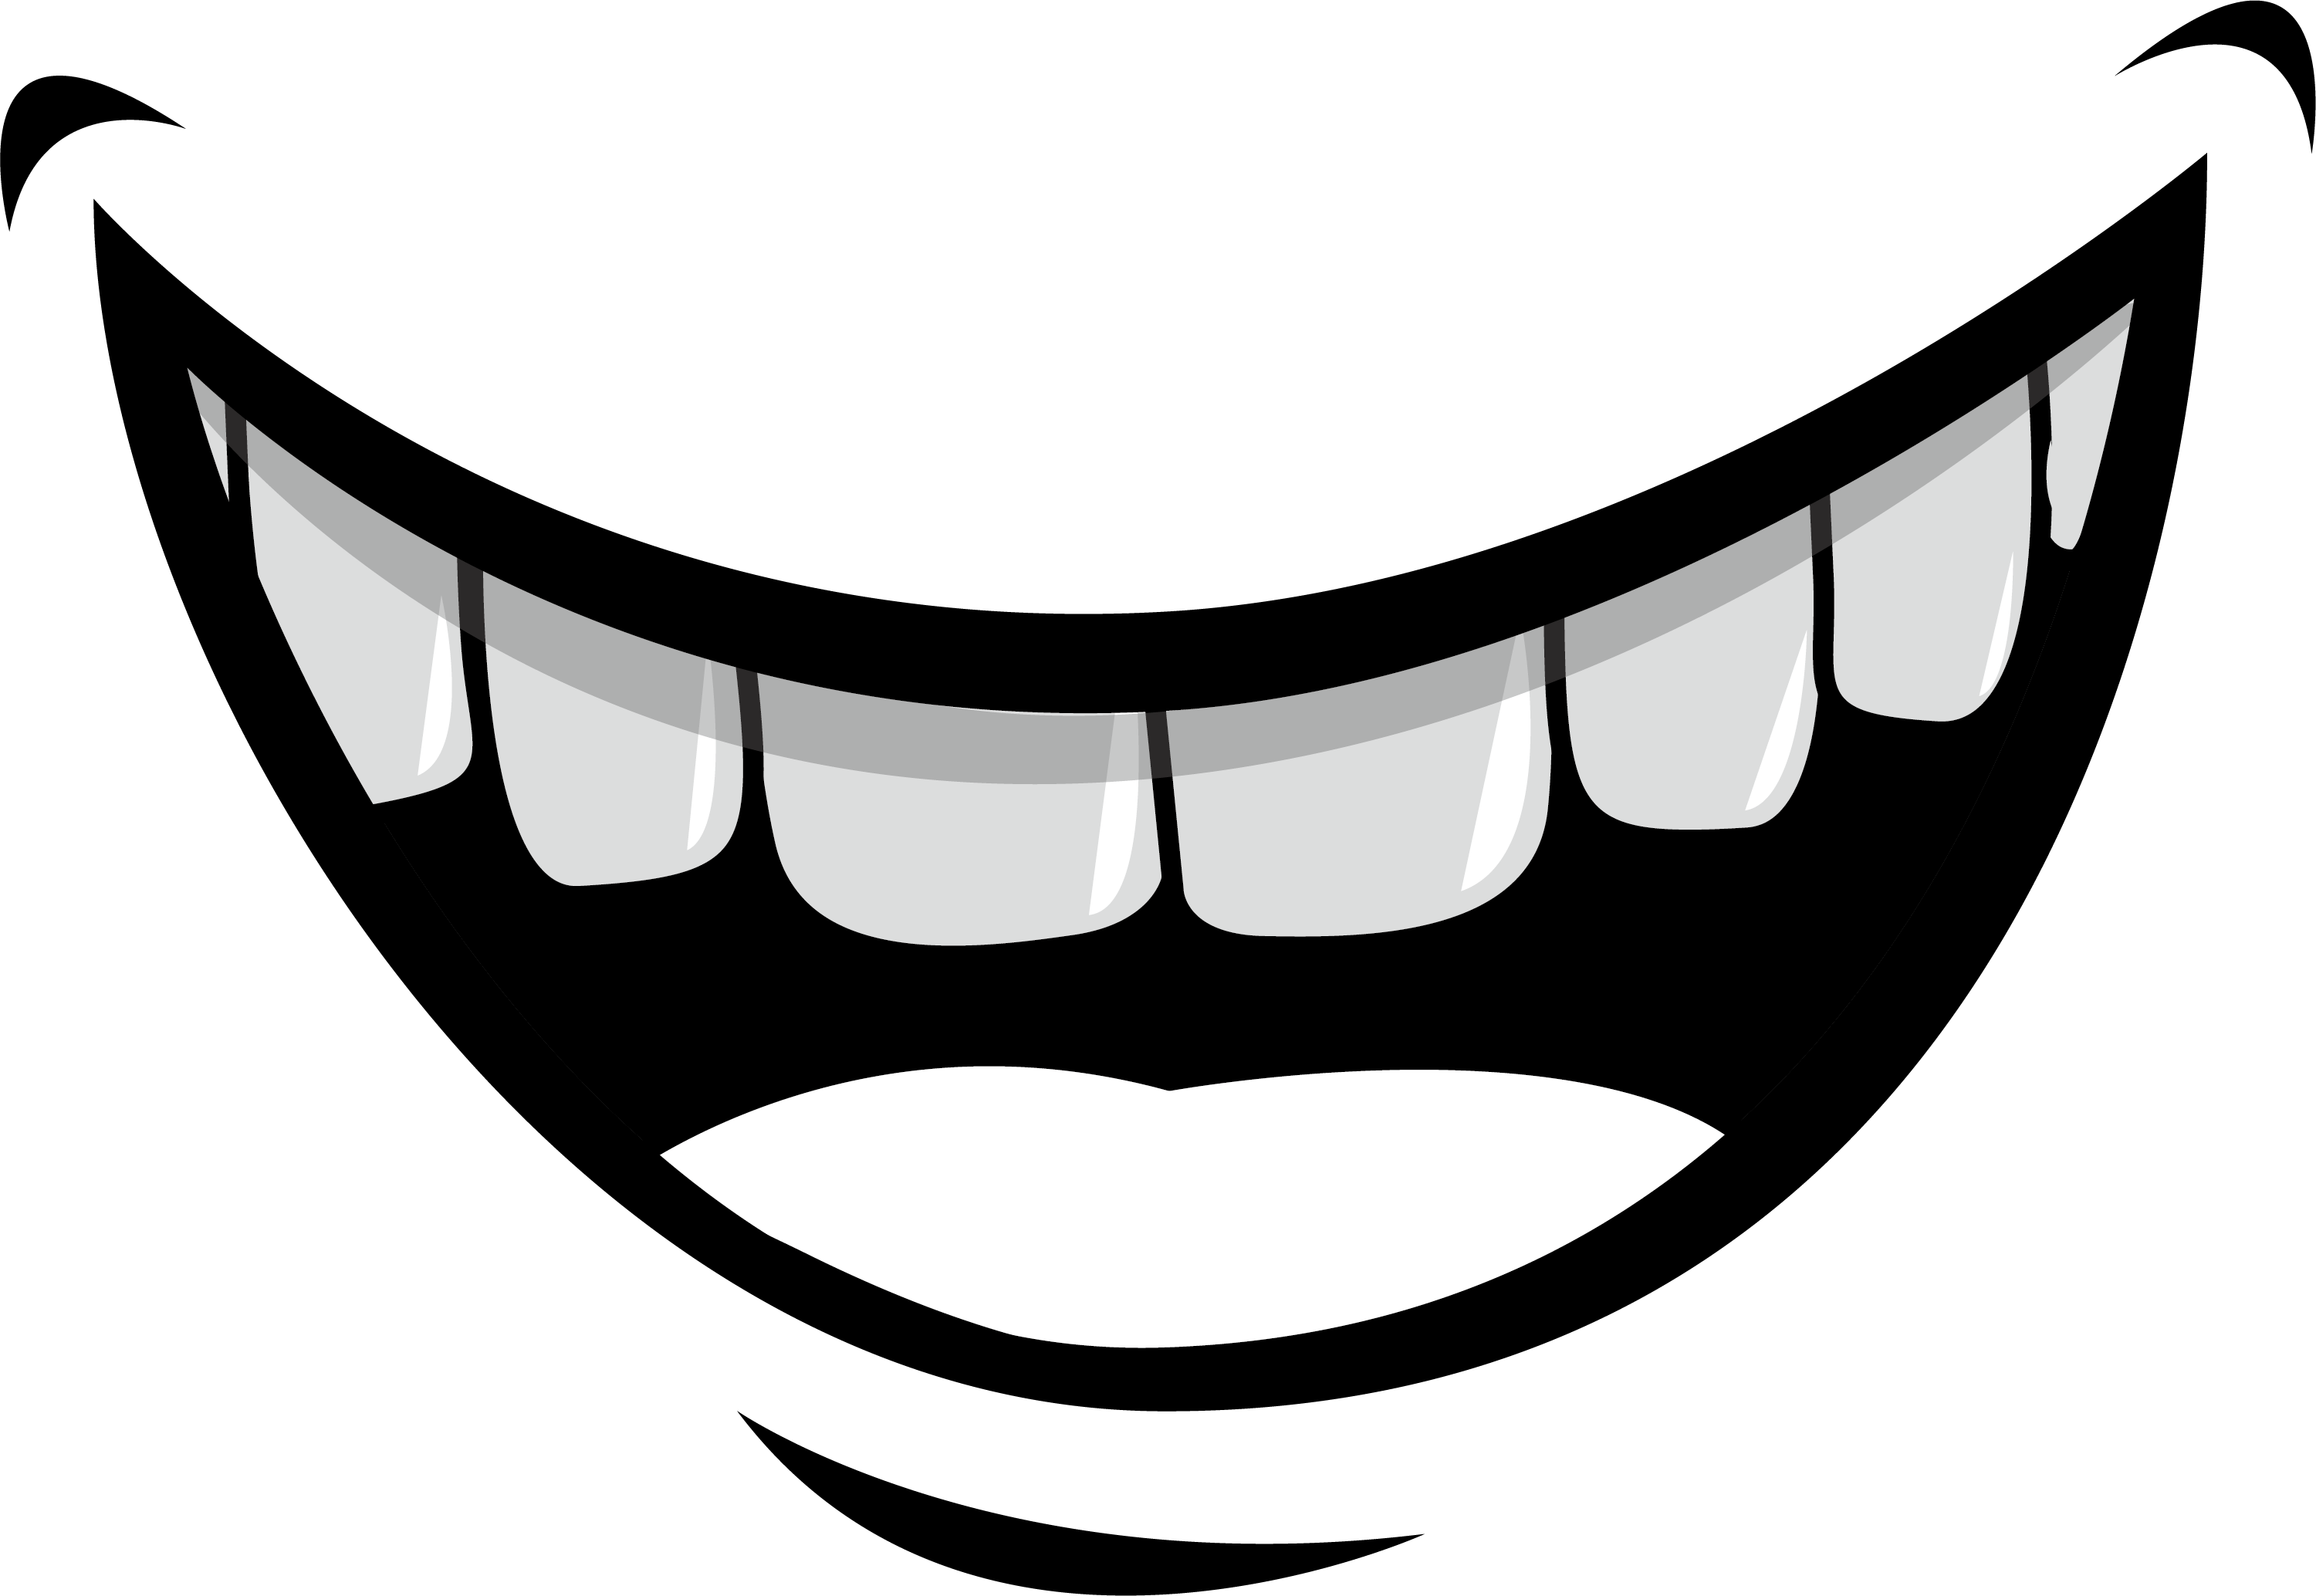 Mouth Lip Tooth Illustration